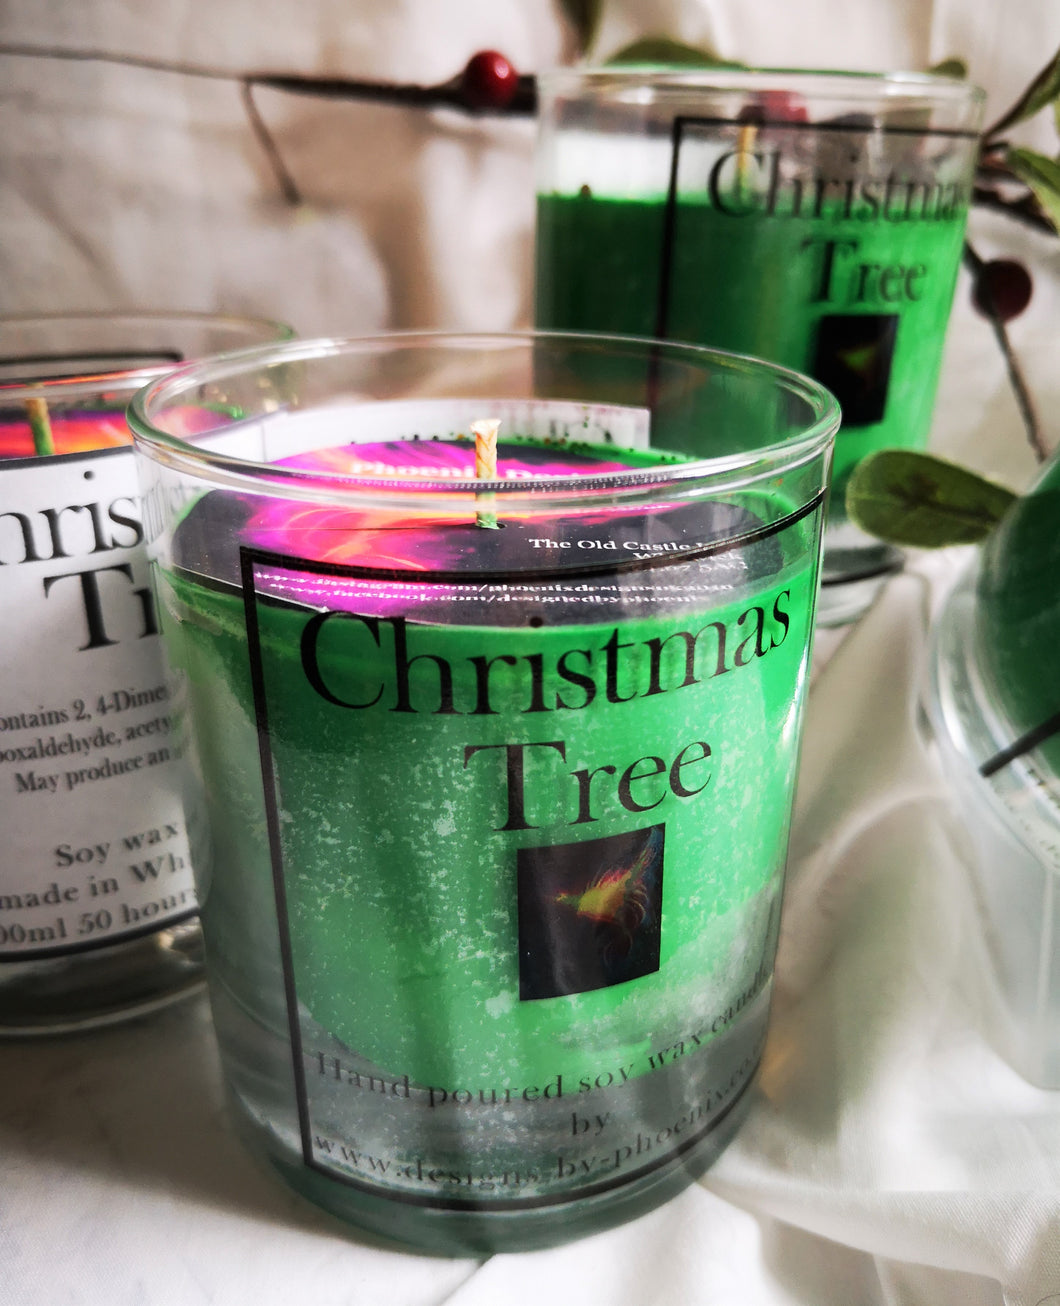 Christmas Tree, pine scented 300ml 10 oz. soy wax candle recyclable glass jar,